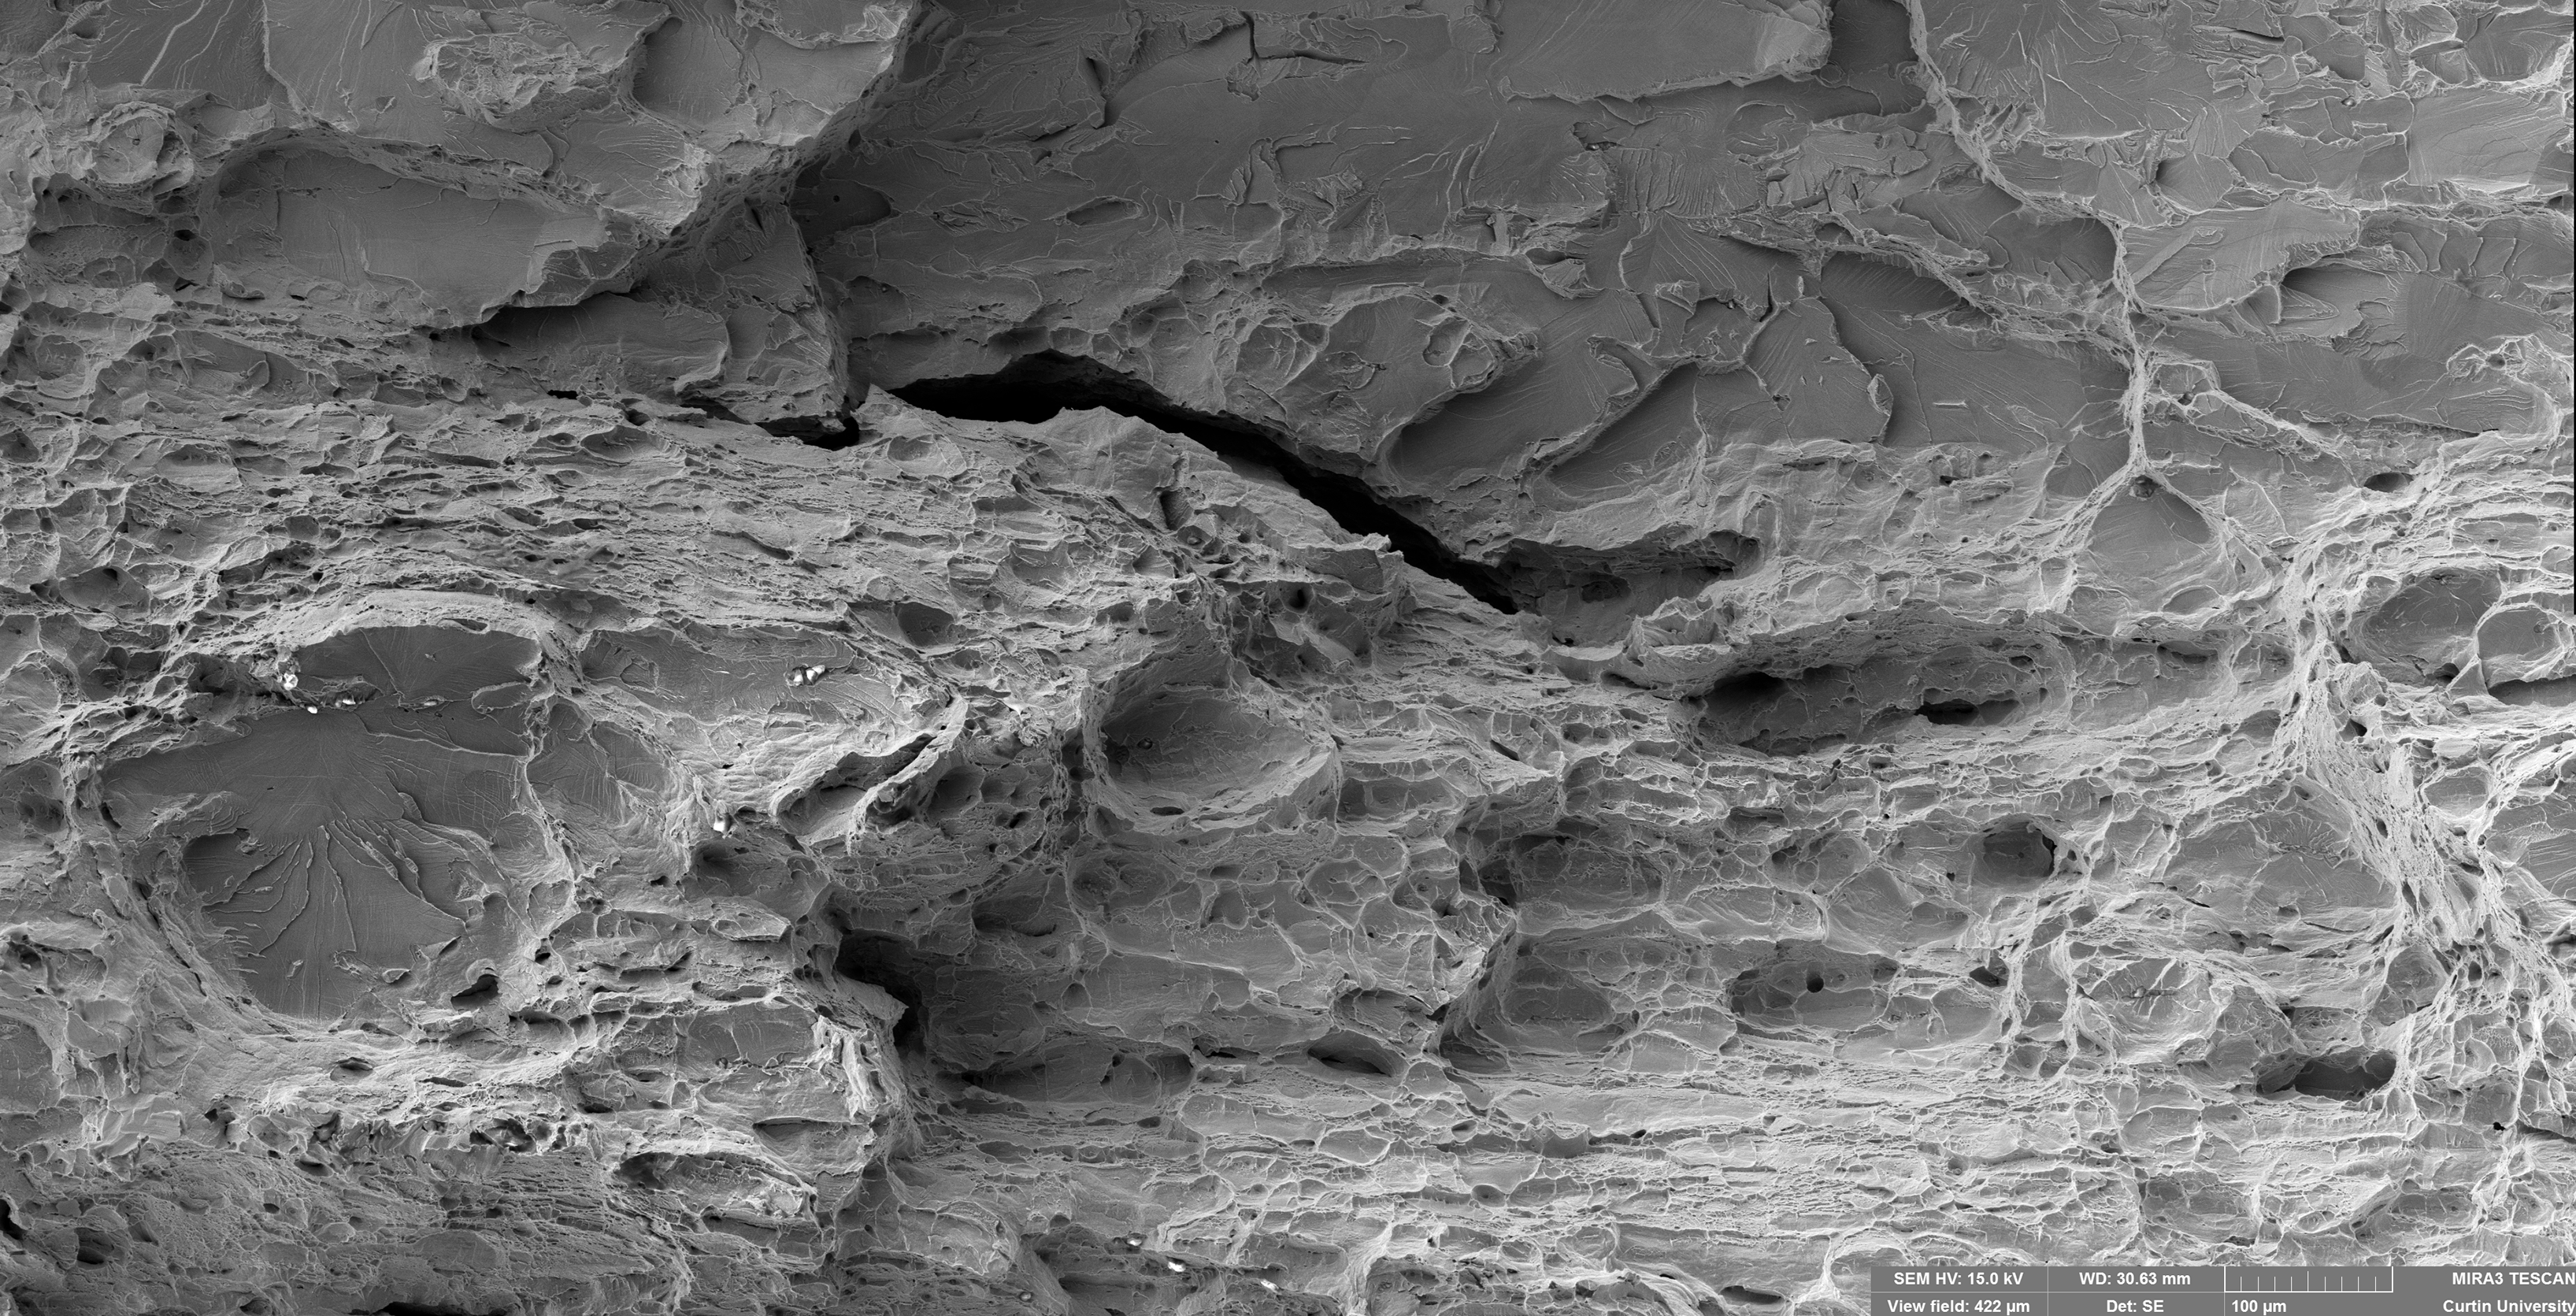 First Place - Sofía Hazarabedian: Composite secondary electron image of the fracture surface (full description in the following slides).